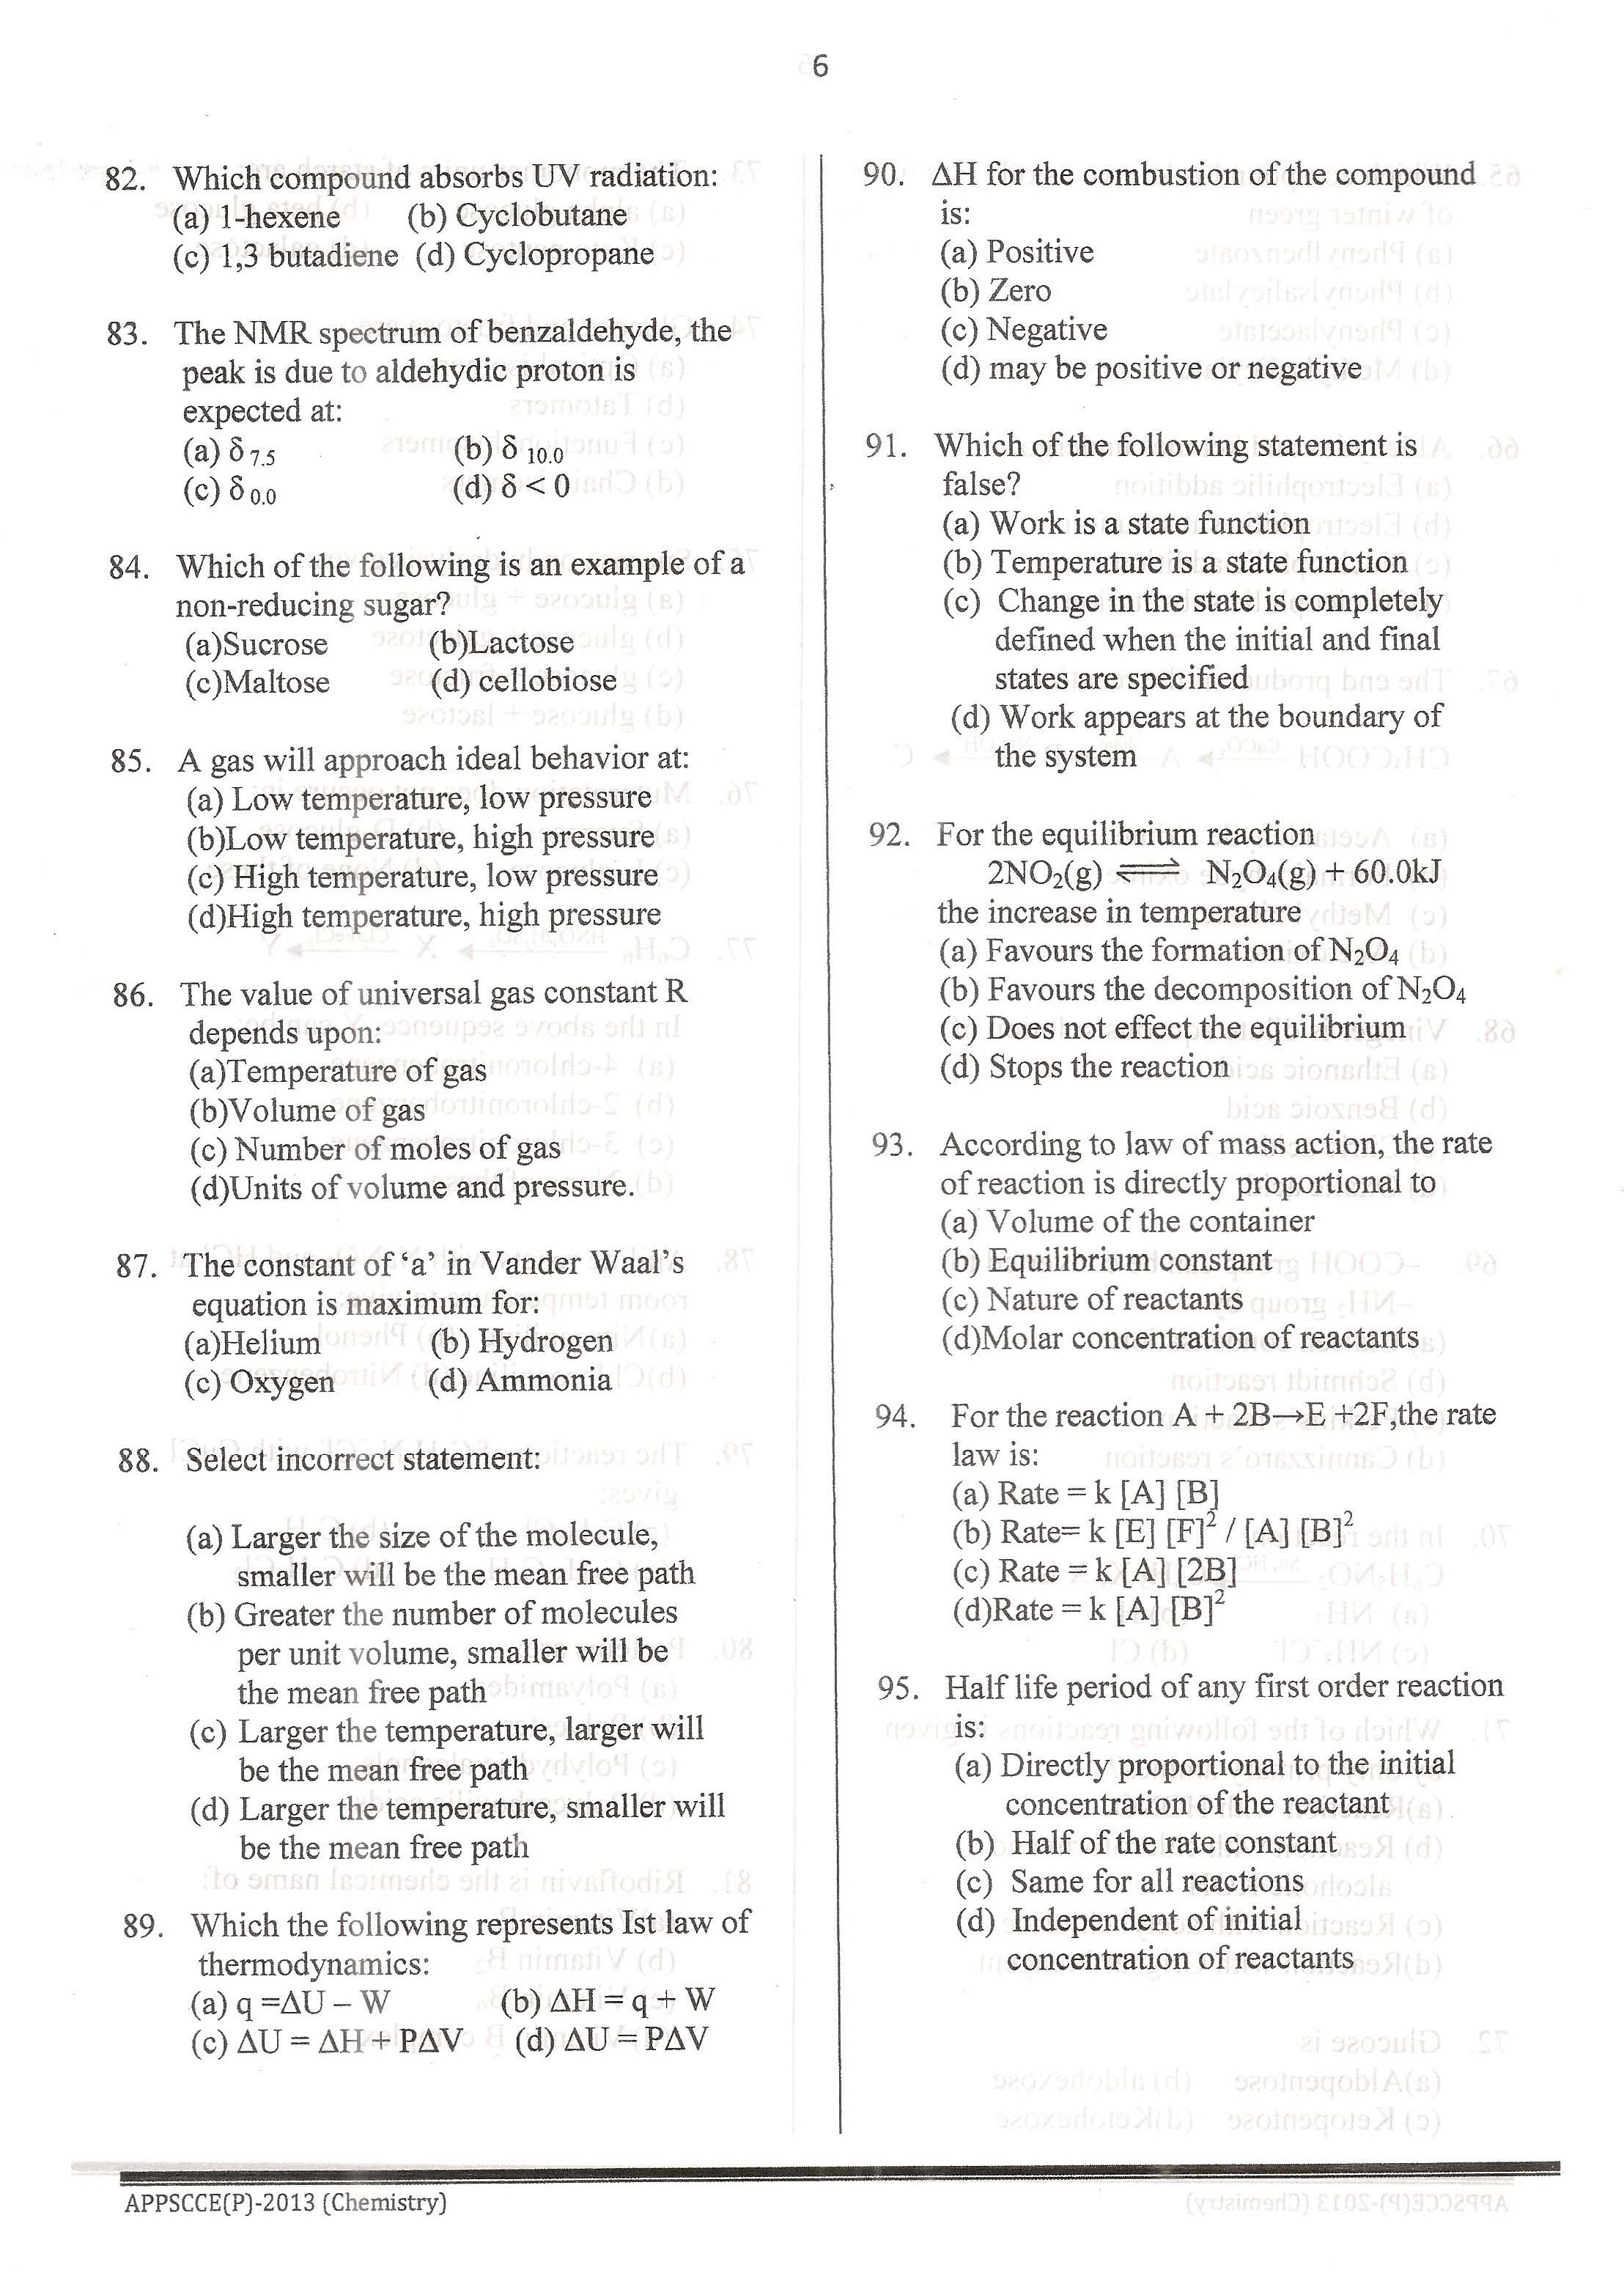 APPSC Combined Competitive Prelims Exam 2013 Chemistry 7